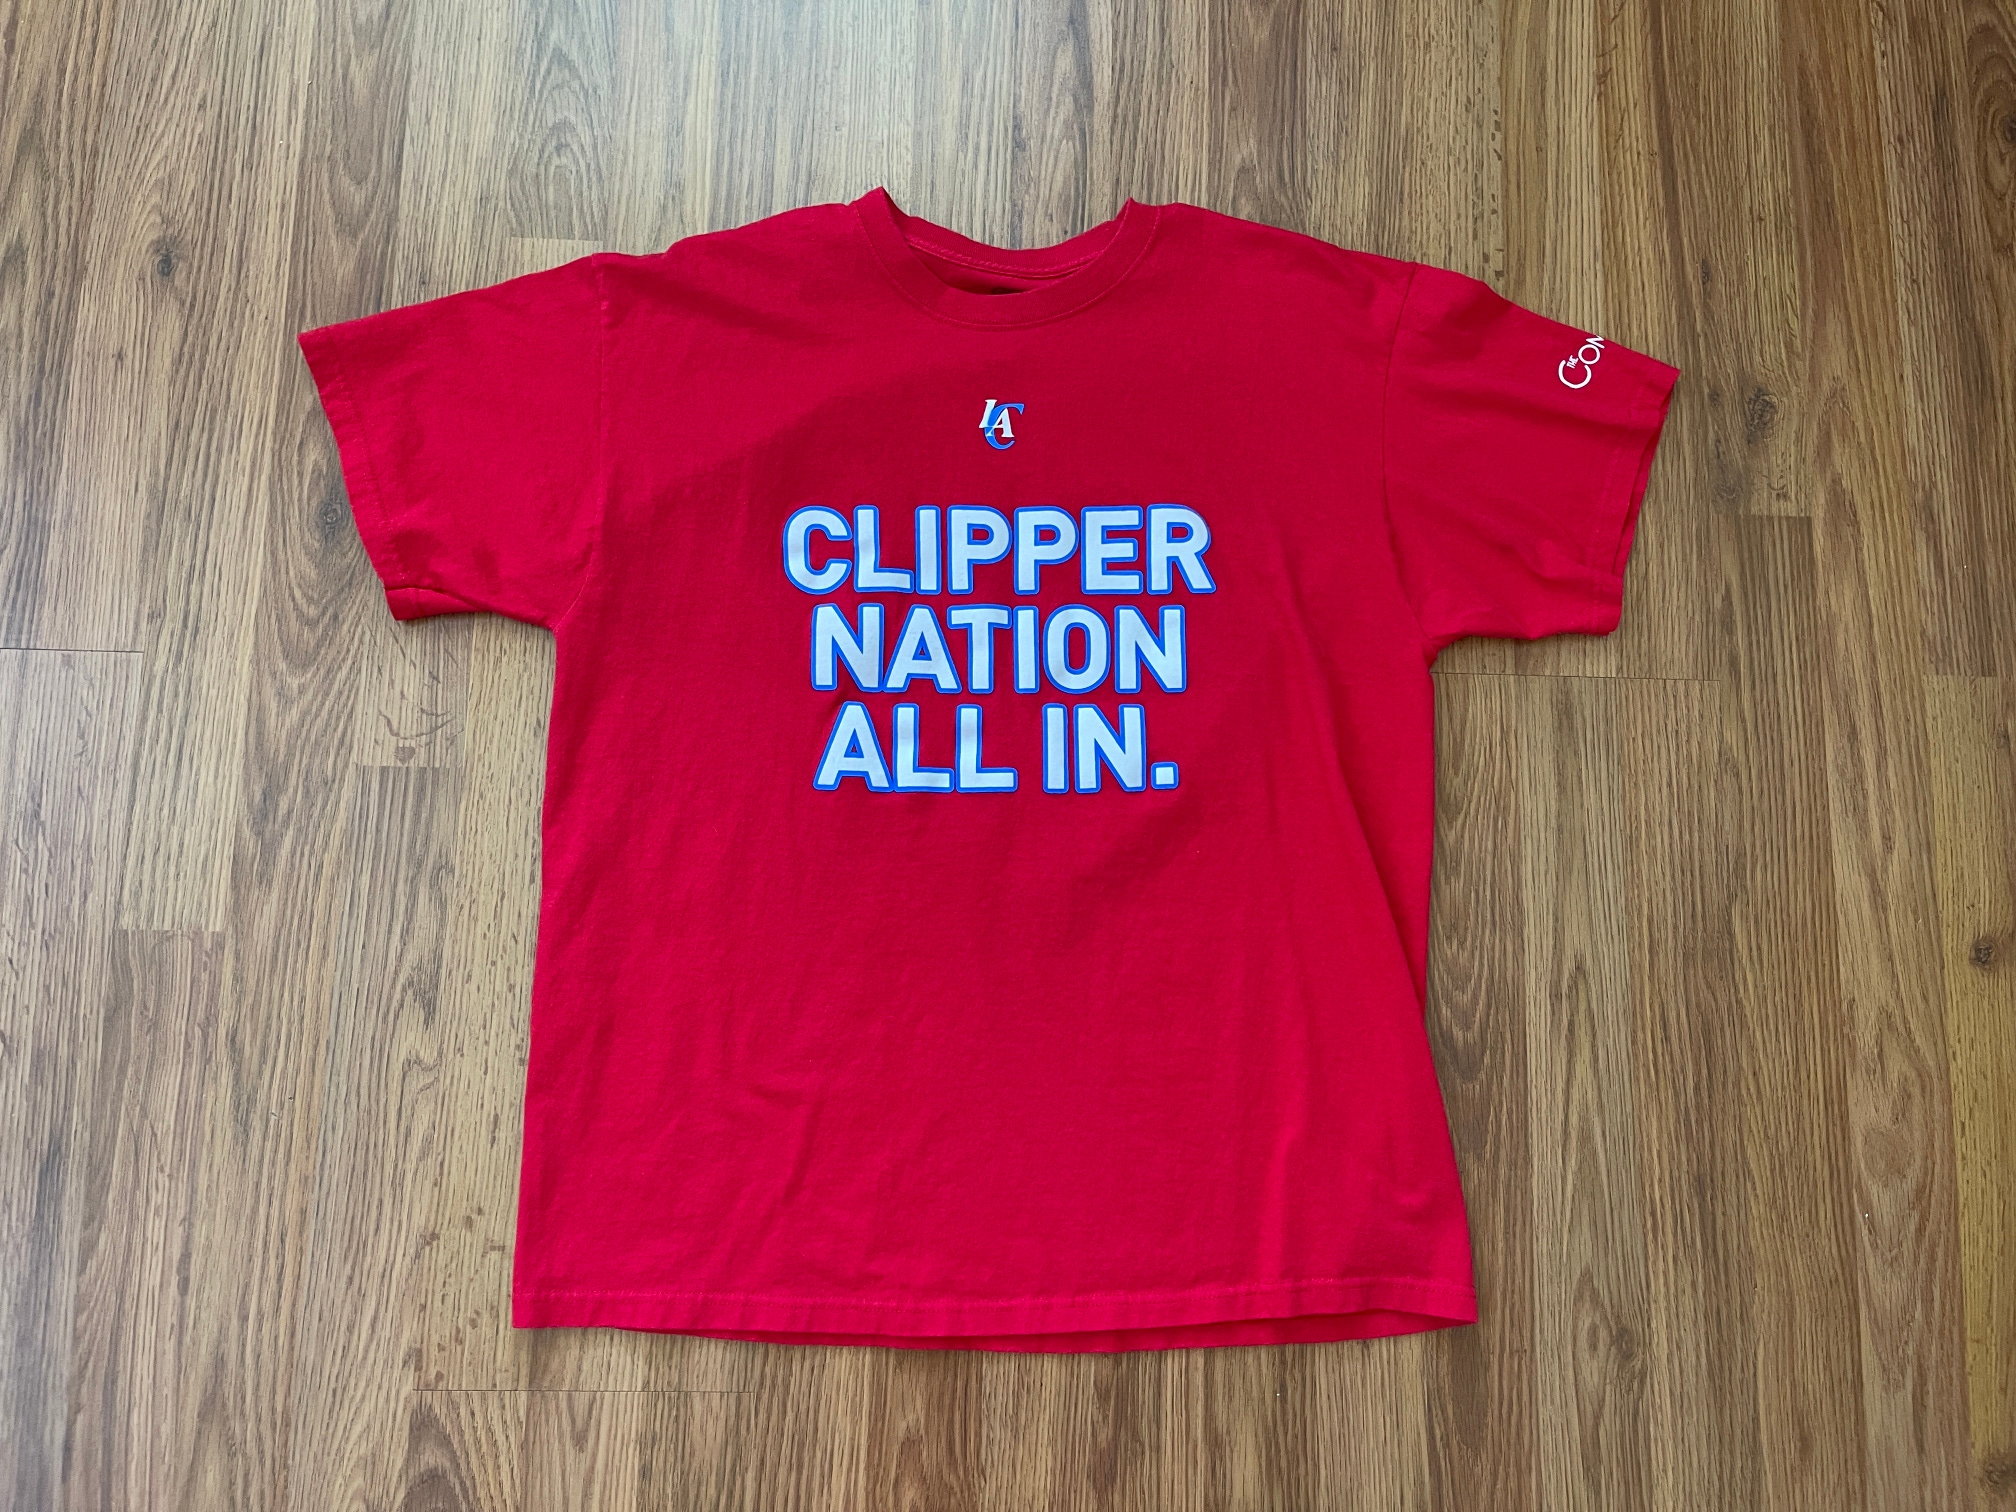 Los Angeles Clippers NBA BASKETBALL PLAYOFFS ALL IN Men's Size Large T Shirt!